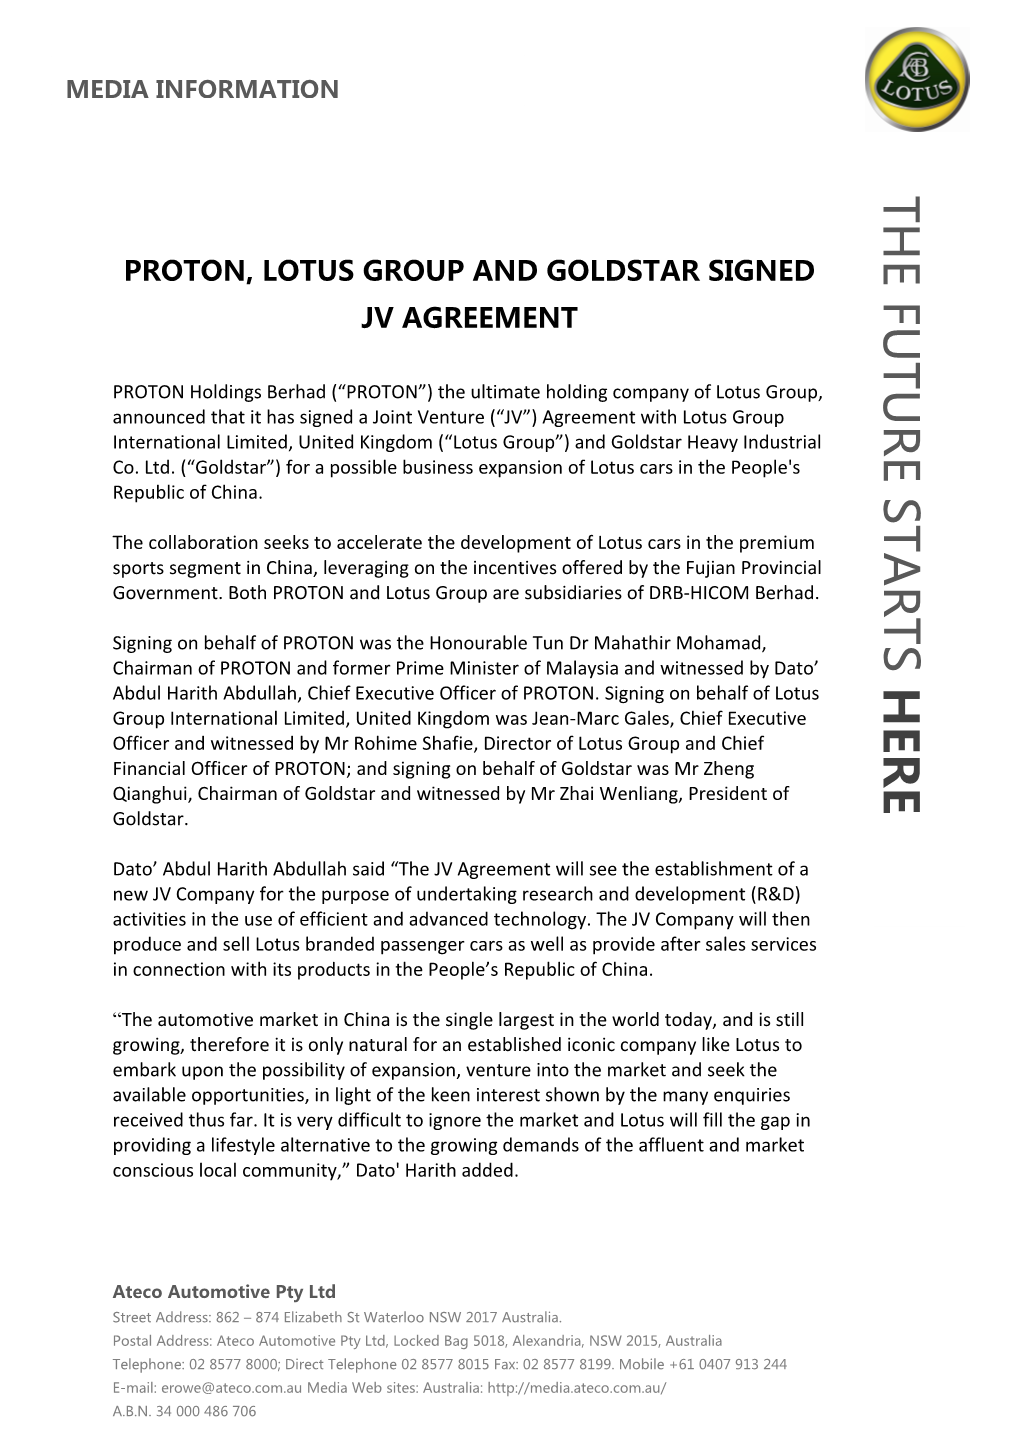 Proton, Lotus Group and Goldstar Signed Jv Agreement